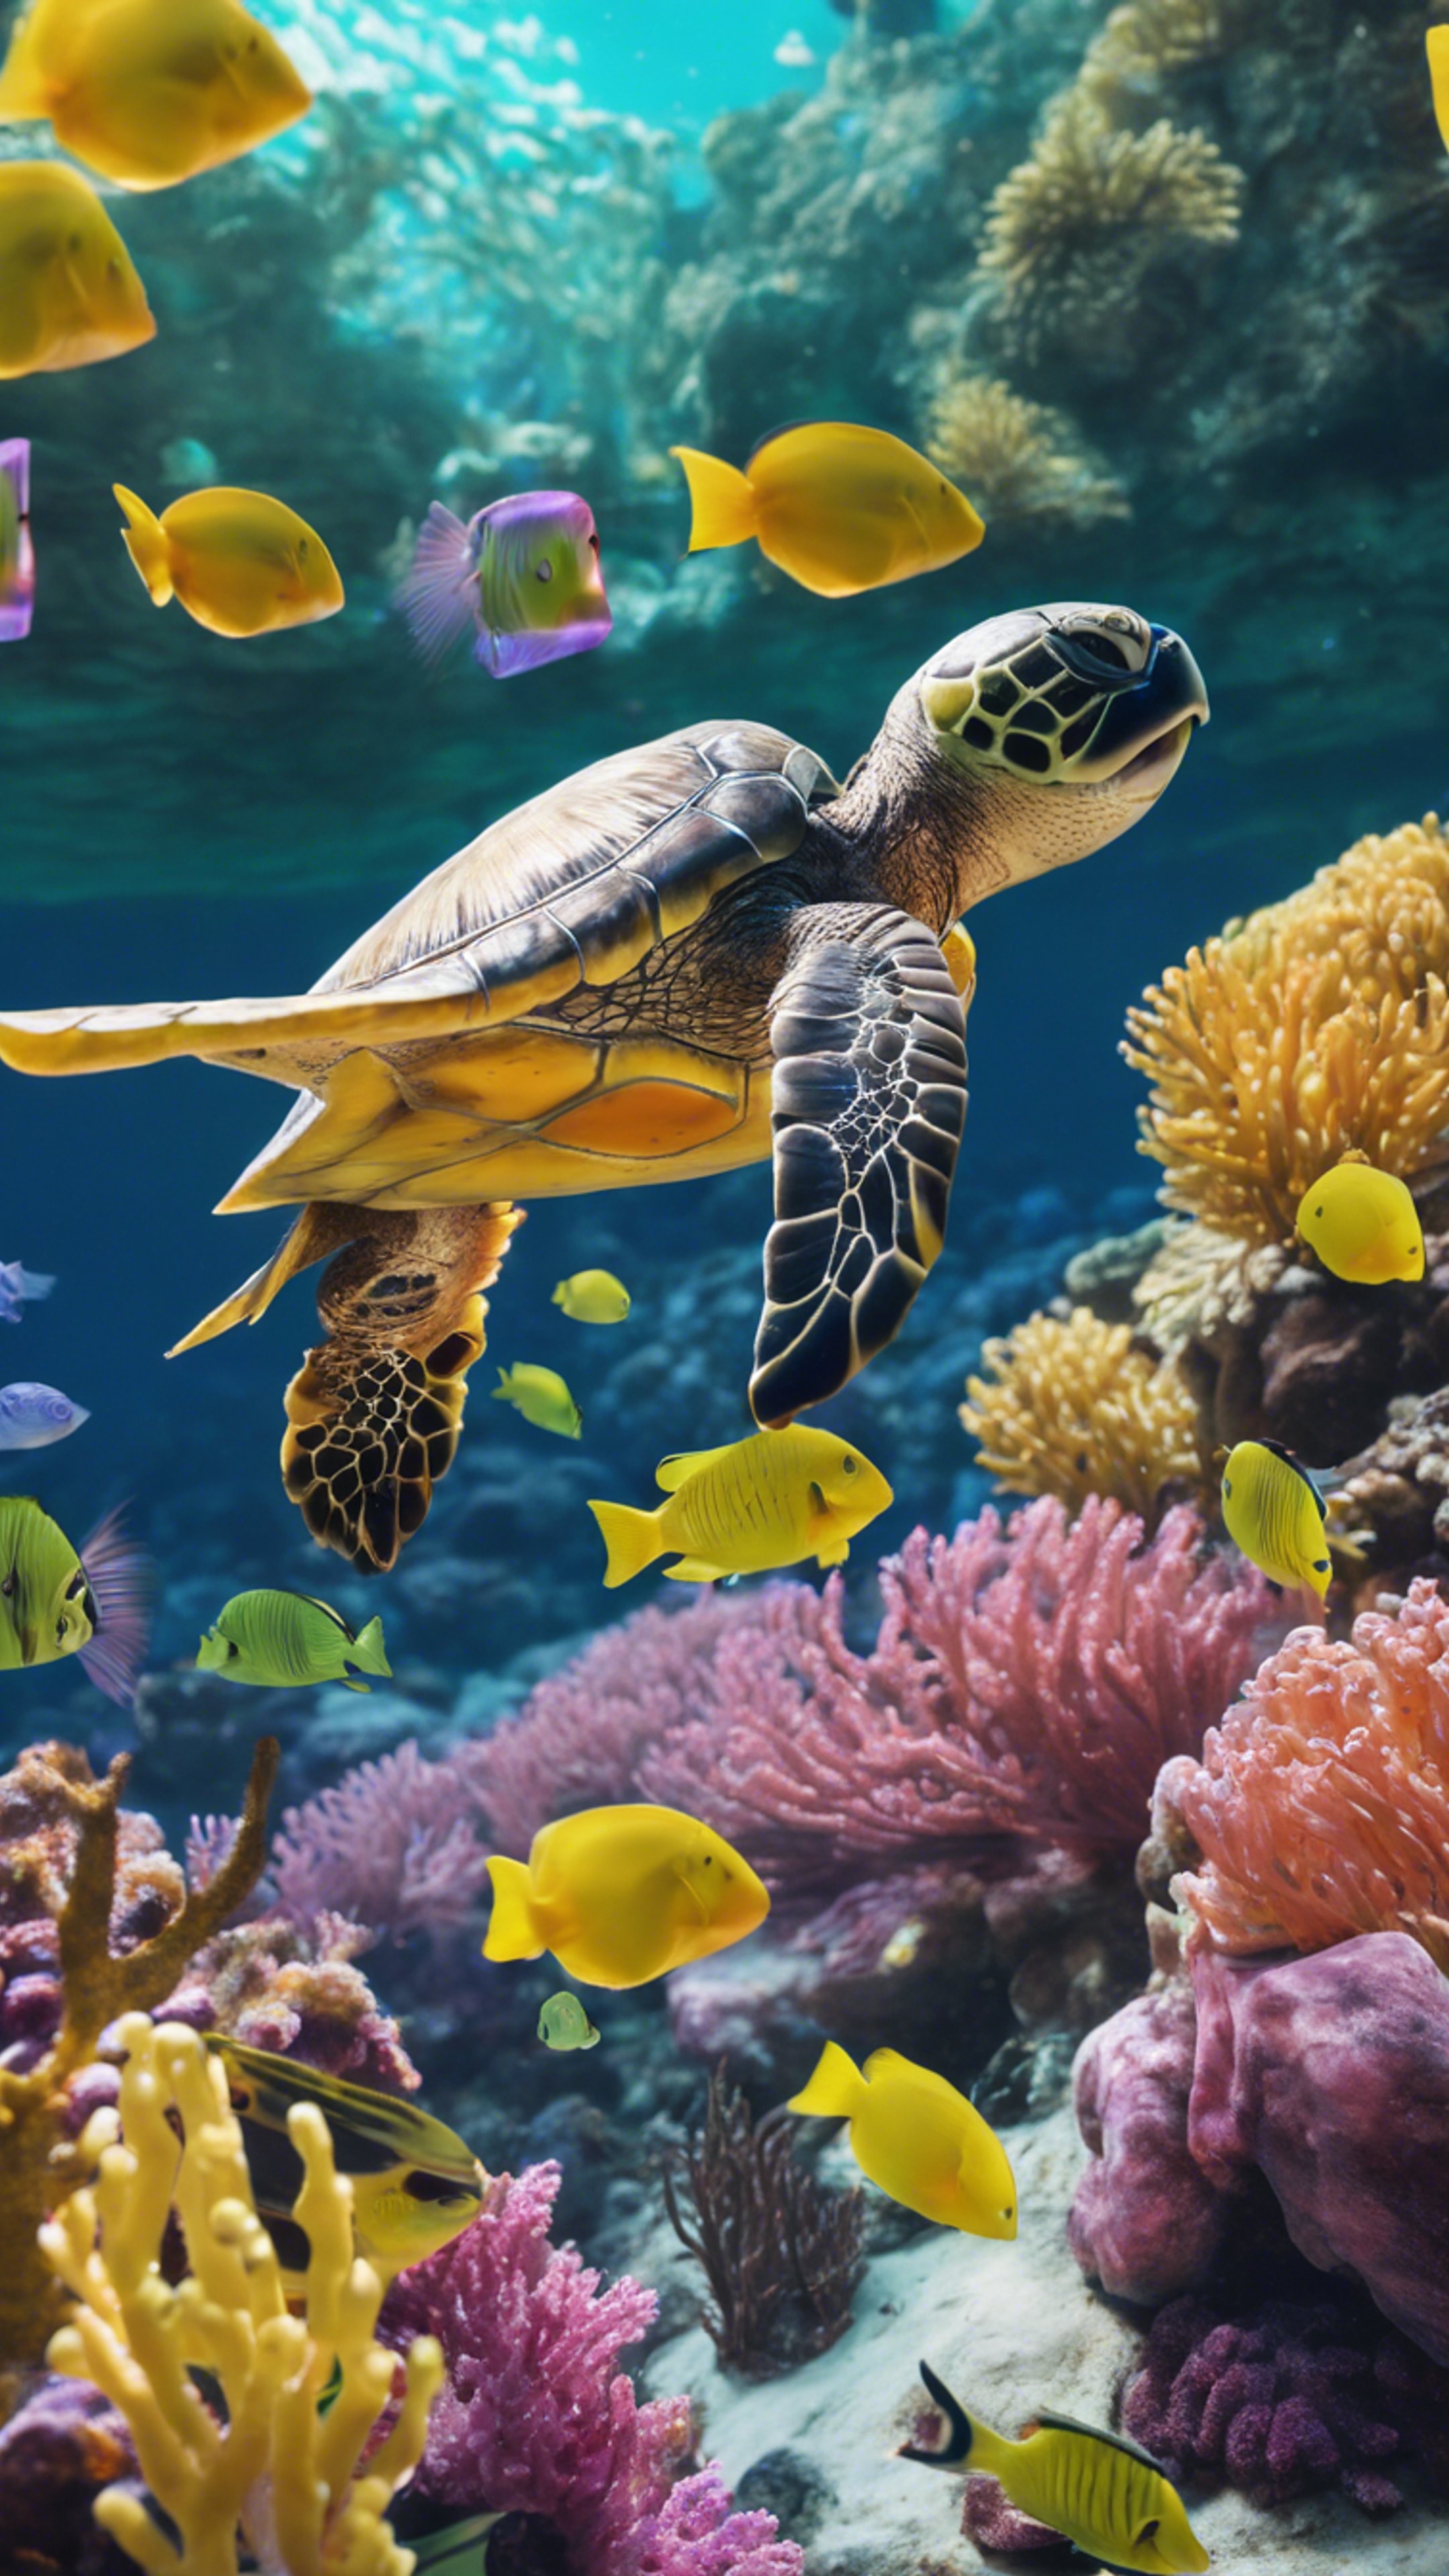 A sea turtle curiously interacting with colorful fishes in a reef. Tapeta[2bbd294c31244e90b849]